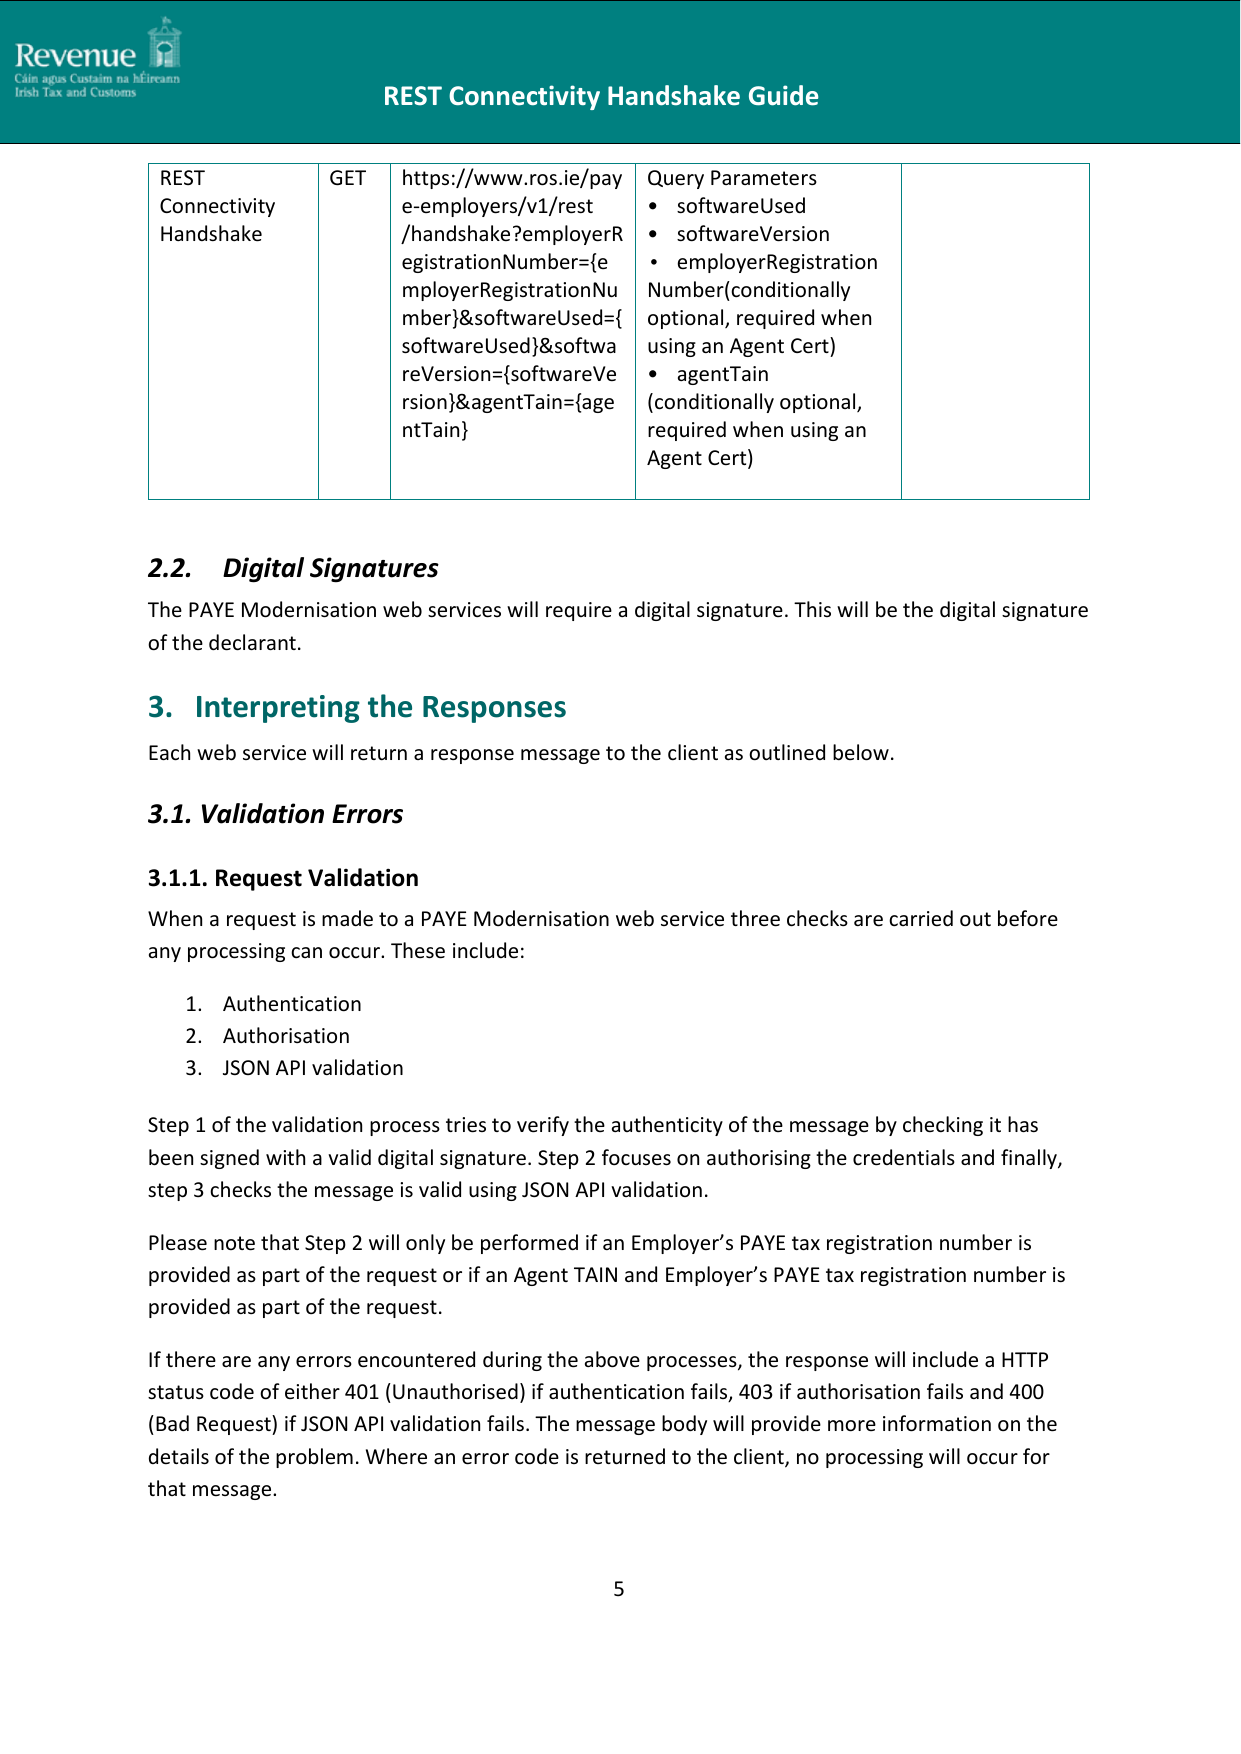 Page 5 of 10 - REST Connectivity Handshake Guide